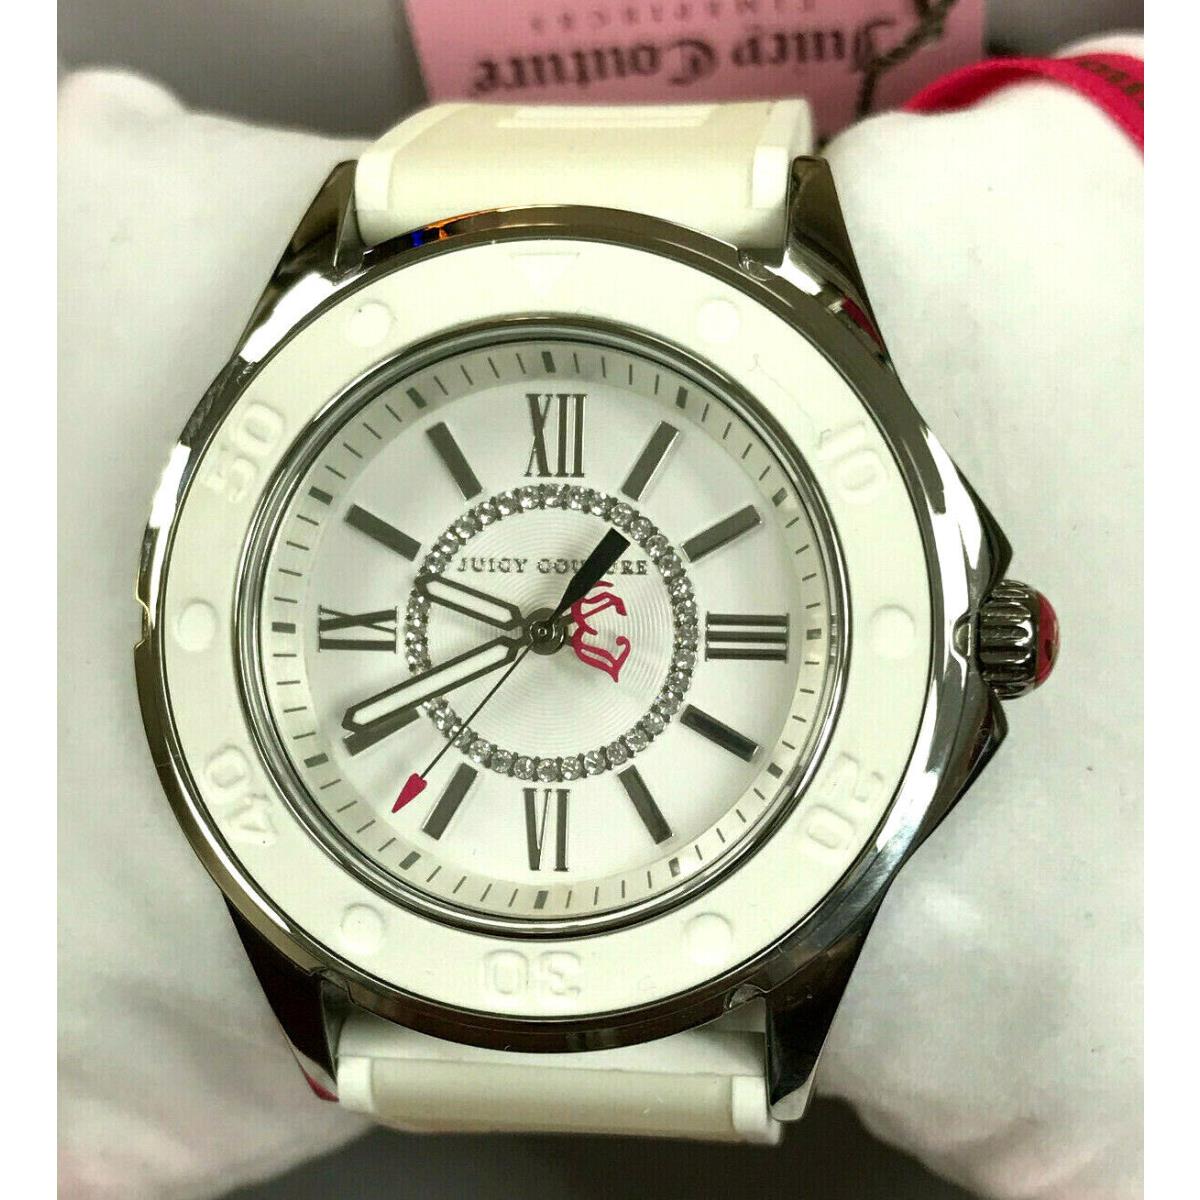 Juicy Couture watch  - White Dial, White/Off White Band, White Bezel 2